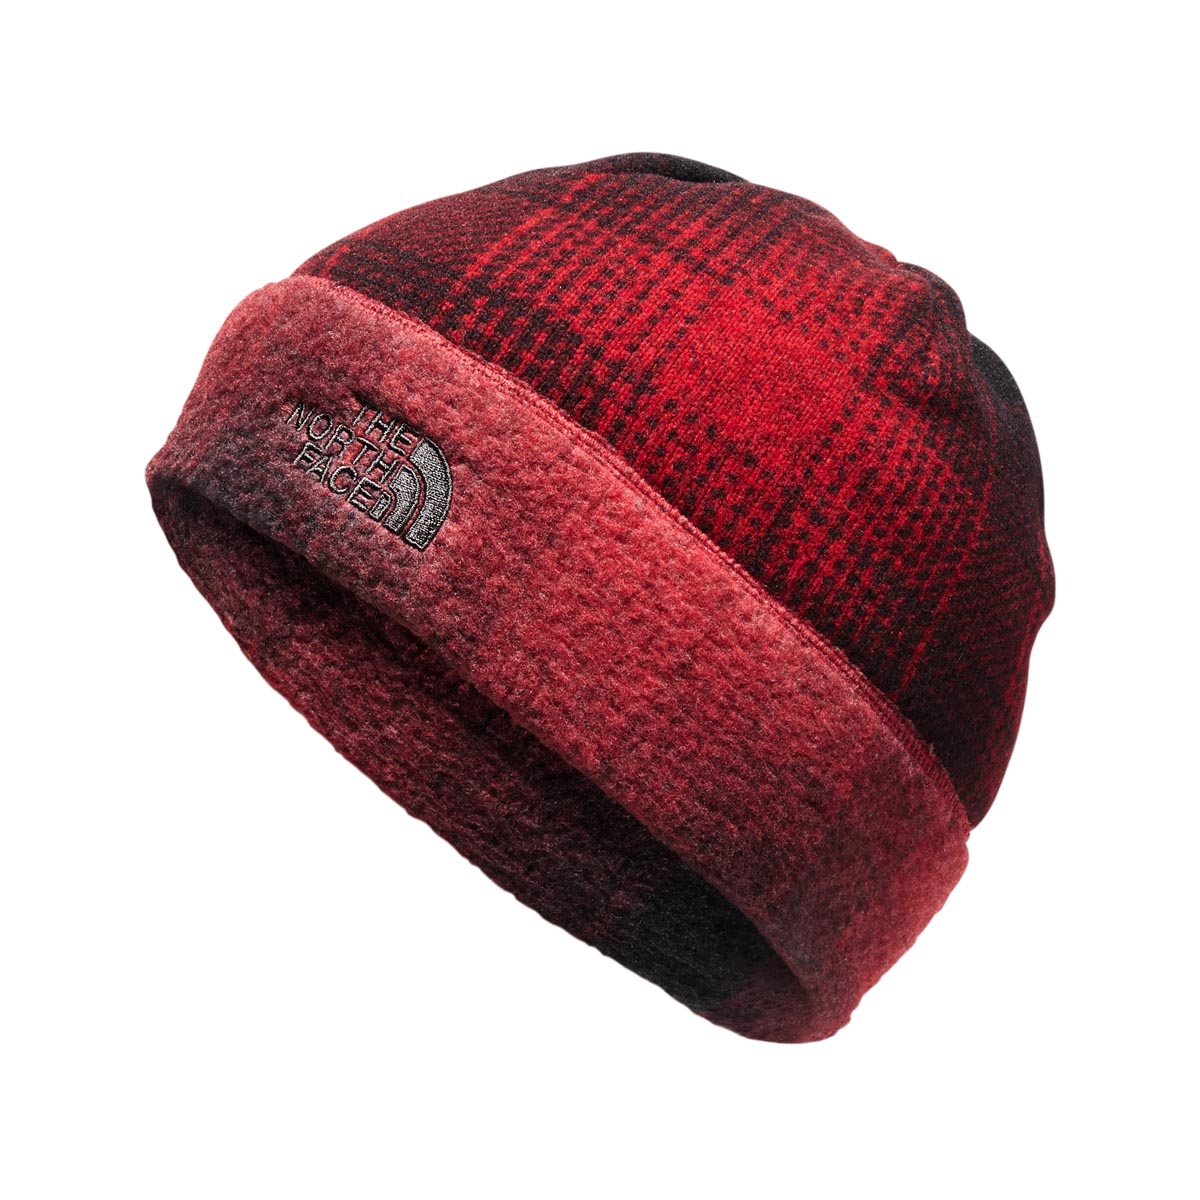 Sweater Fleece Beanie - The North Face 